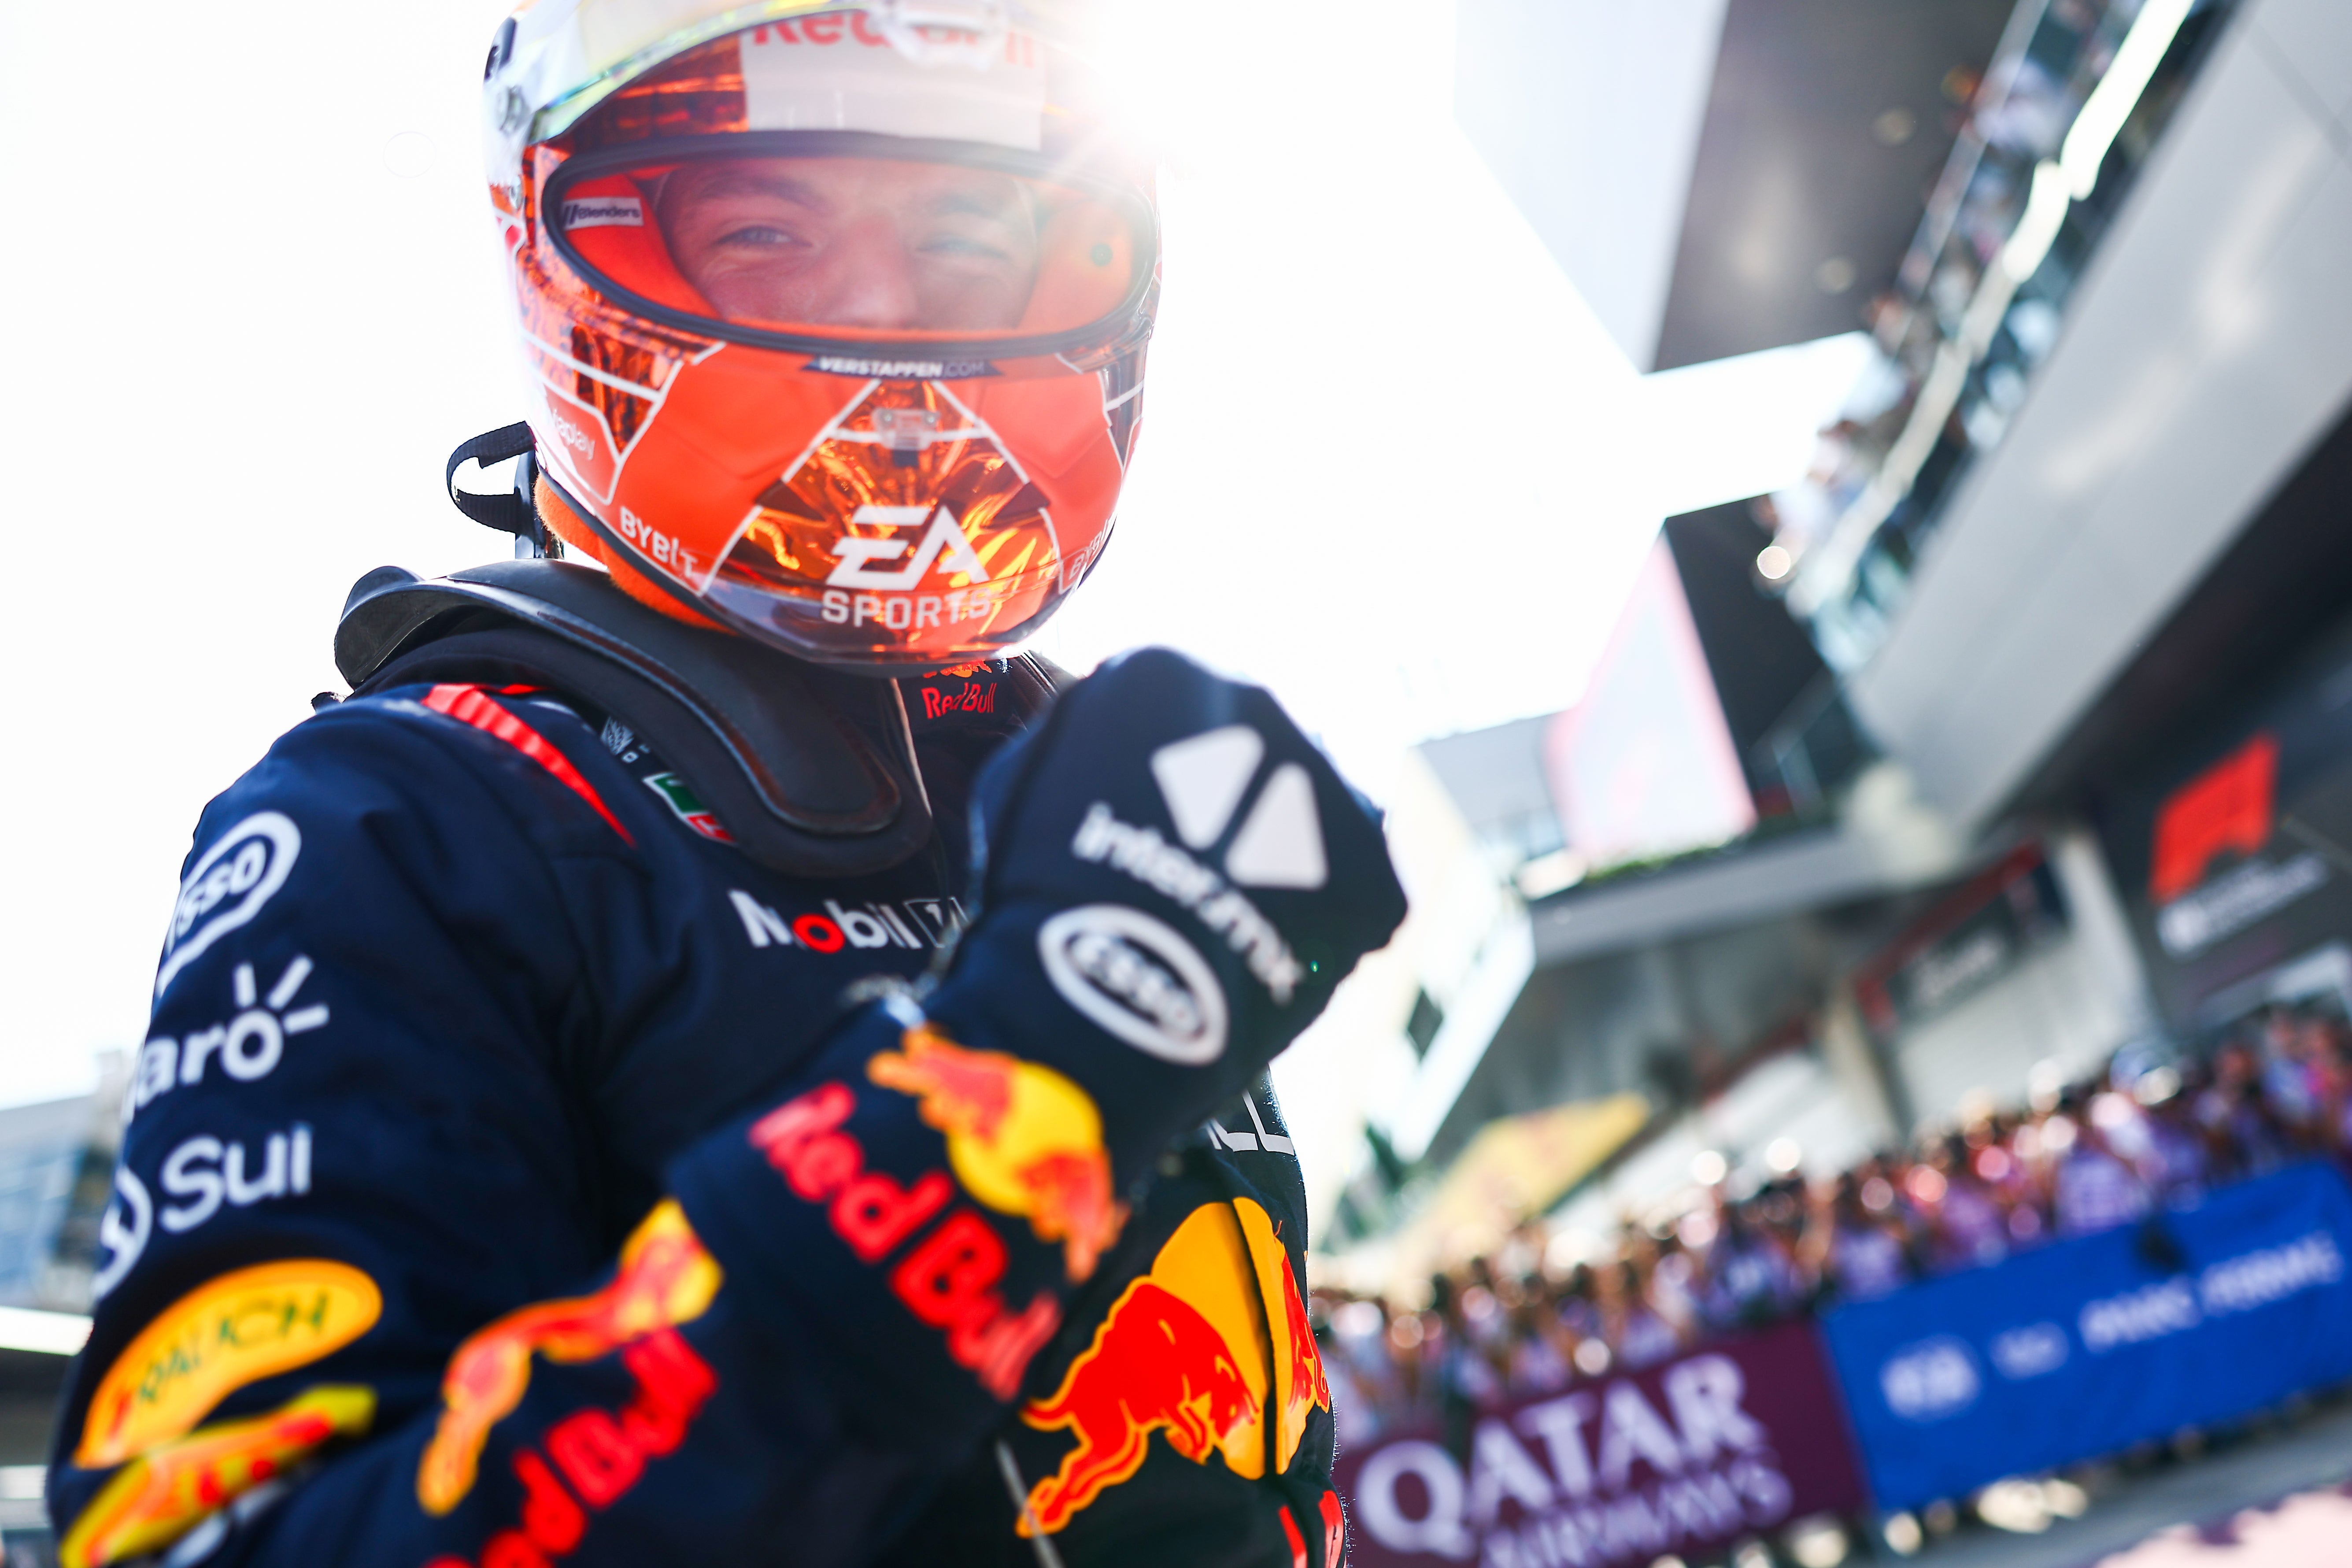 Max Verstappen is on pole for the Austrian Grand Prix